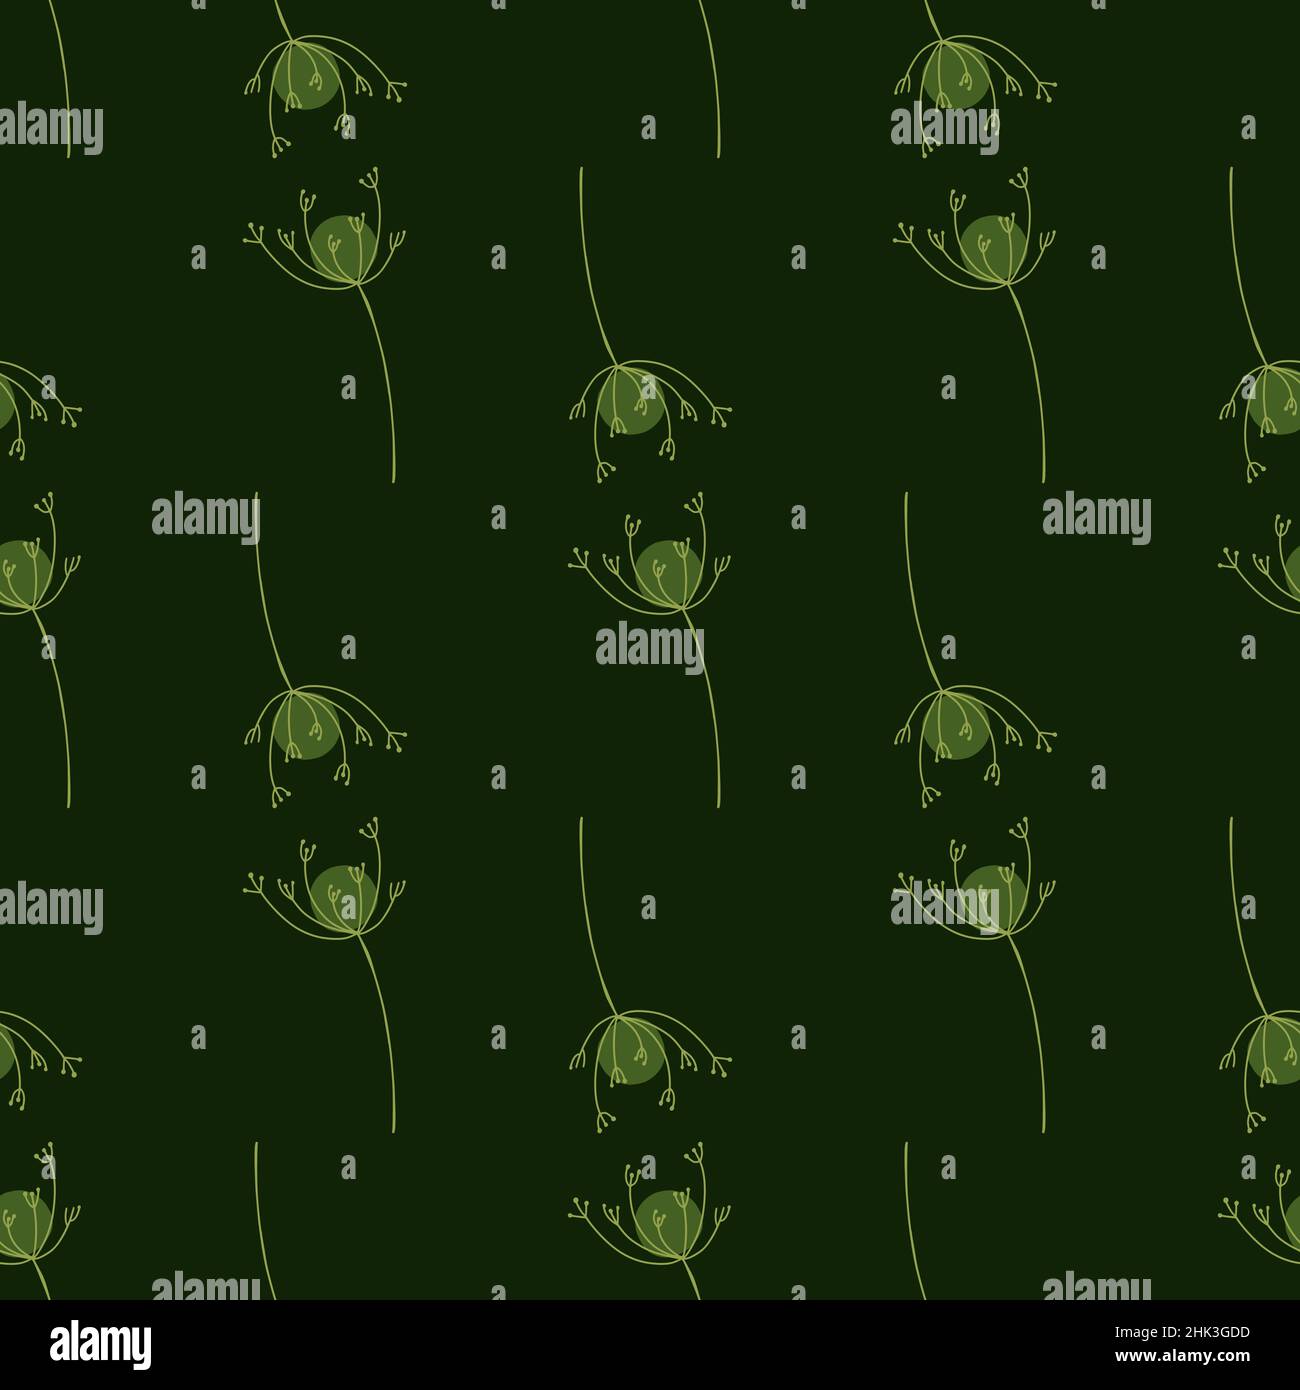 Field nature seamless doodle pattern with simple yarrow contoured shapes. Dark green background. Graphic design for wrapping paper and fabric textures Stock Vector